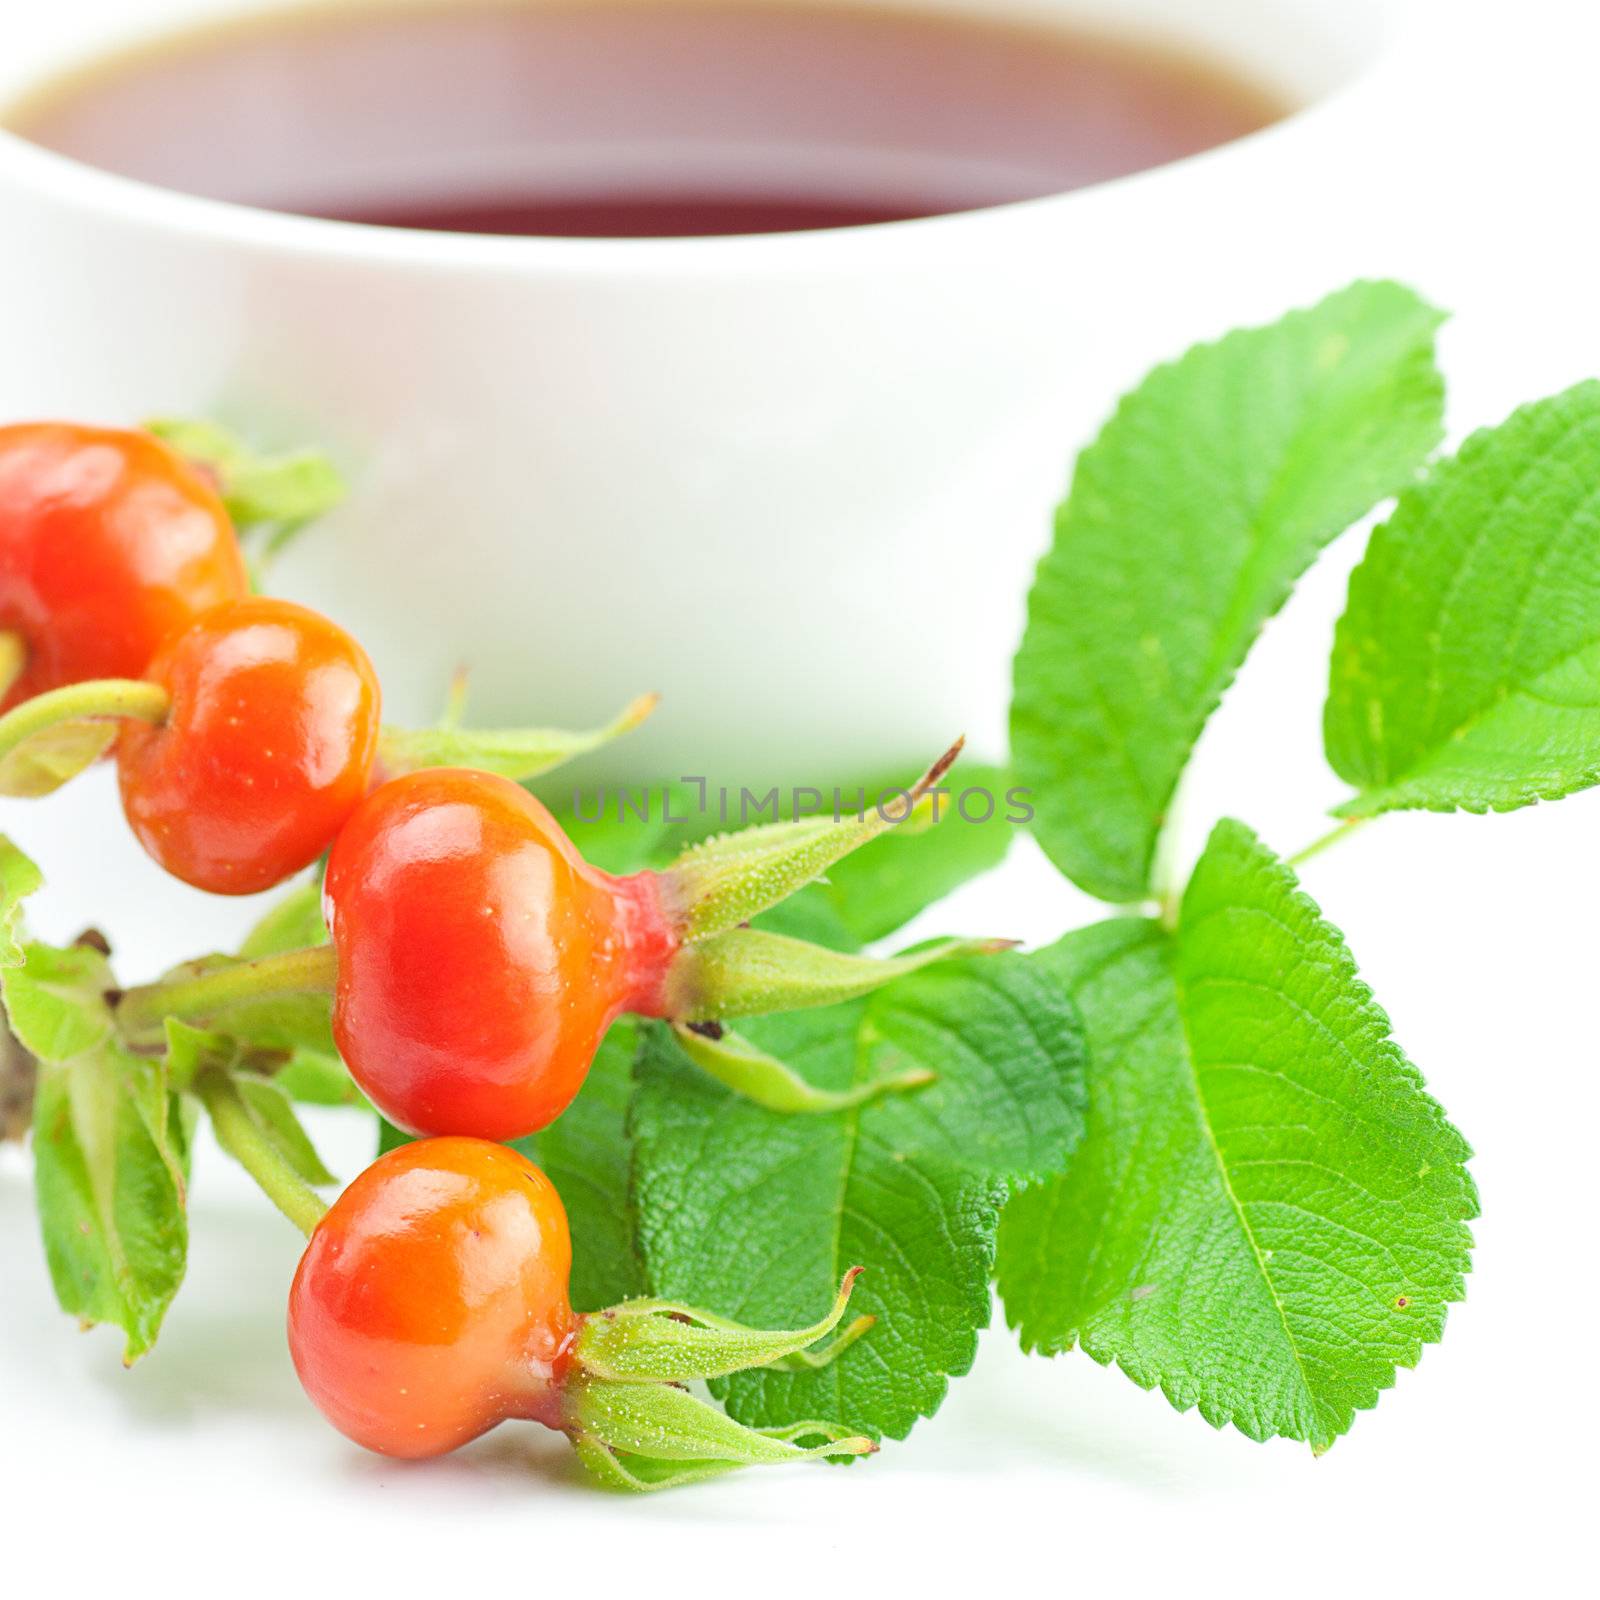 cup of tea and rosehip berries with leaves on white background